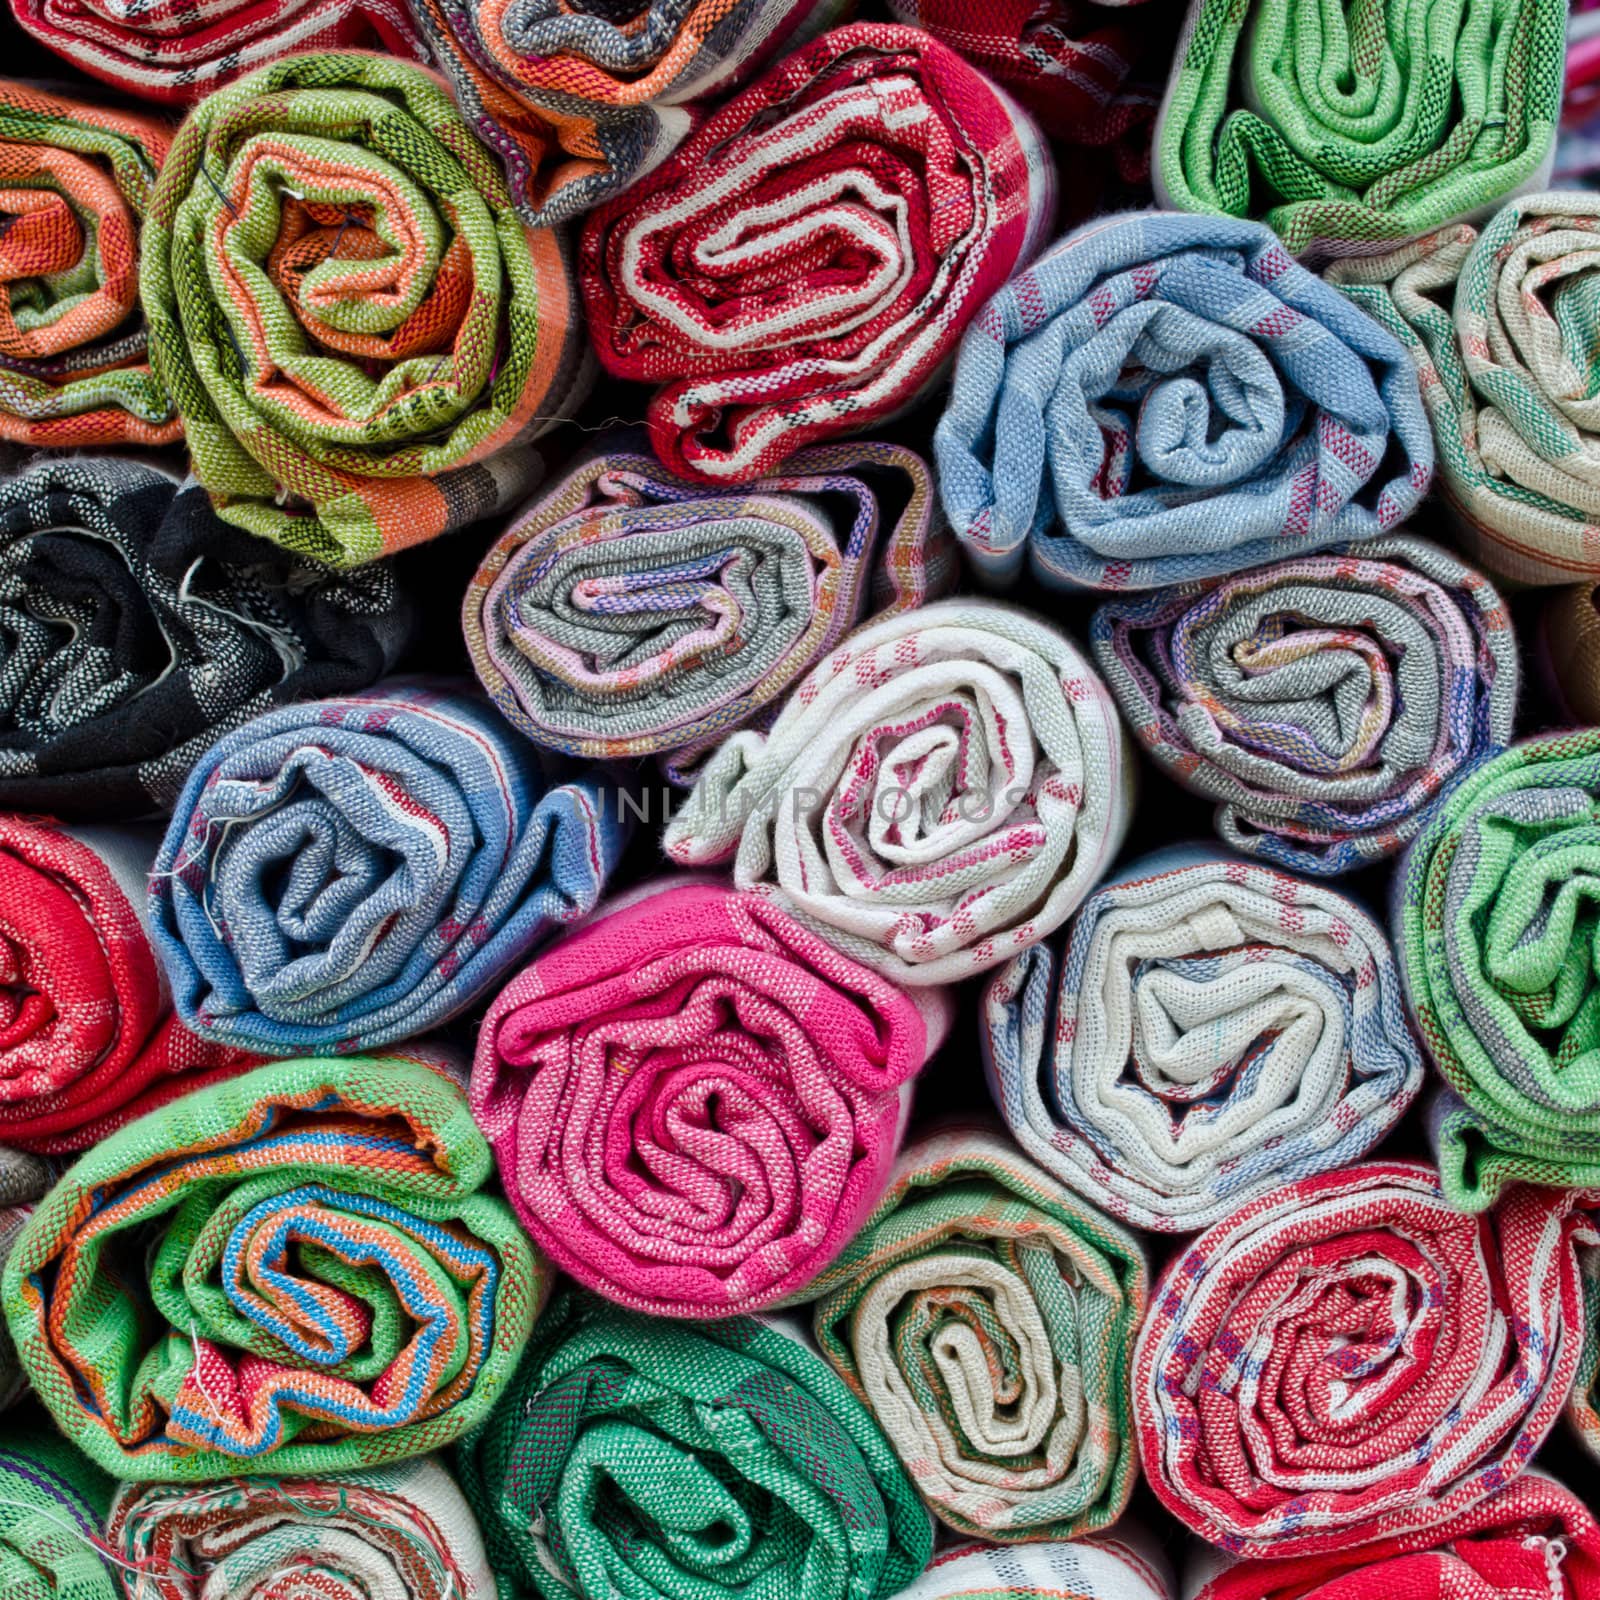 Pile of colorful cotton towels